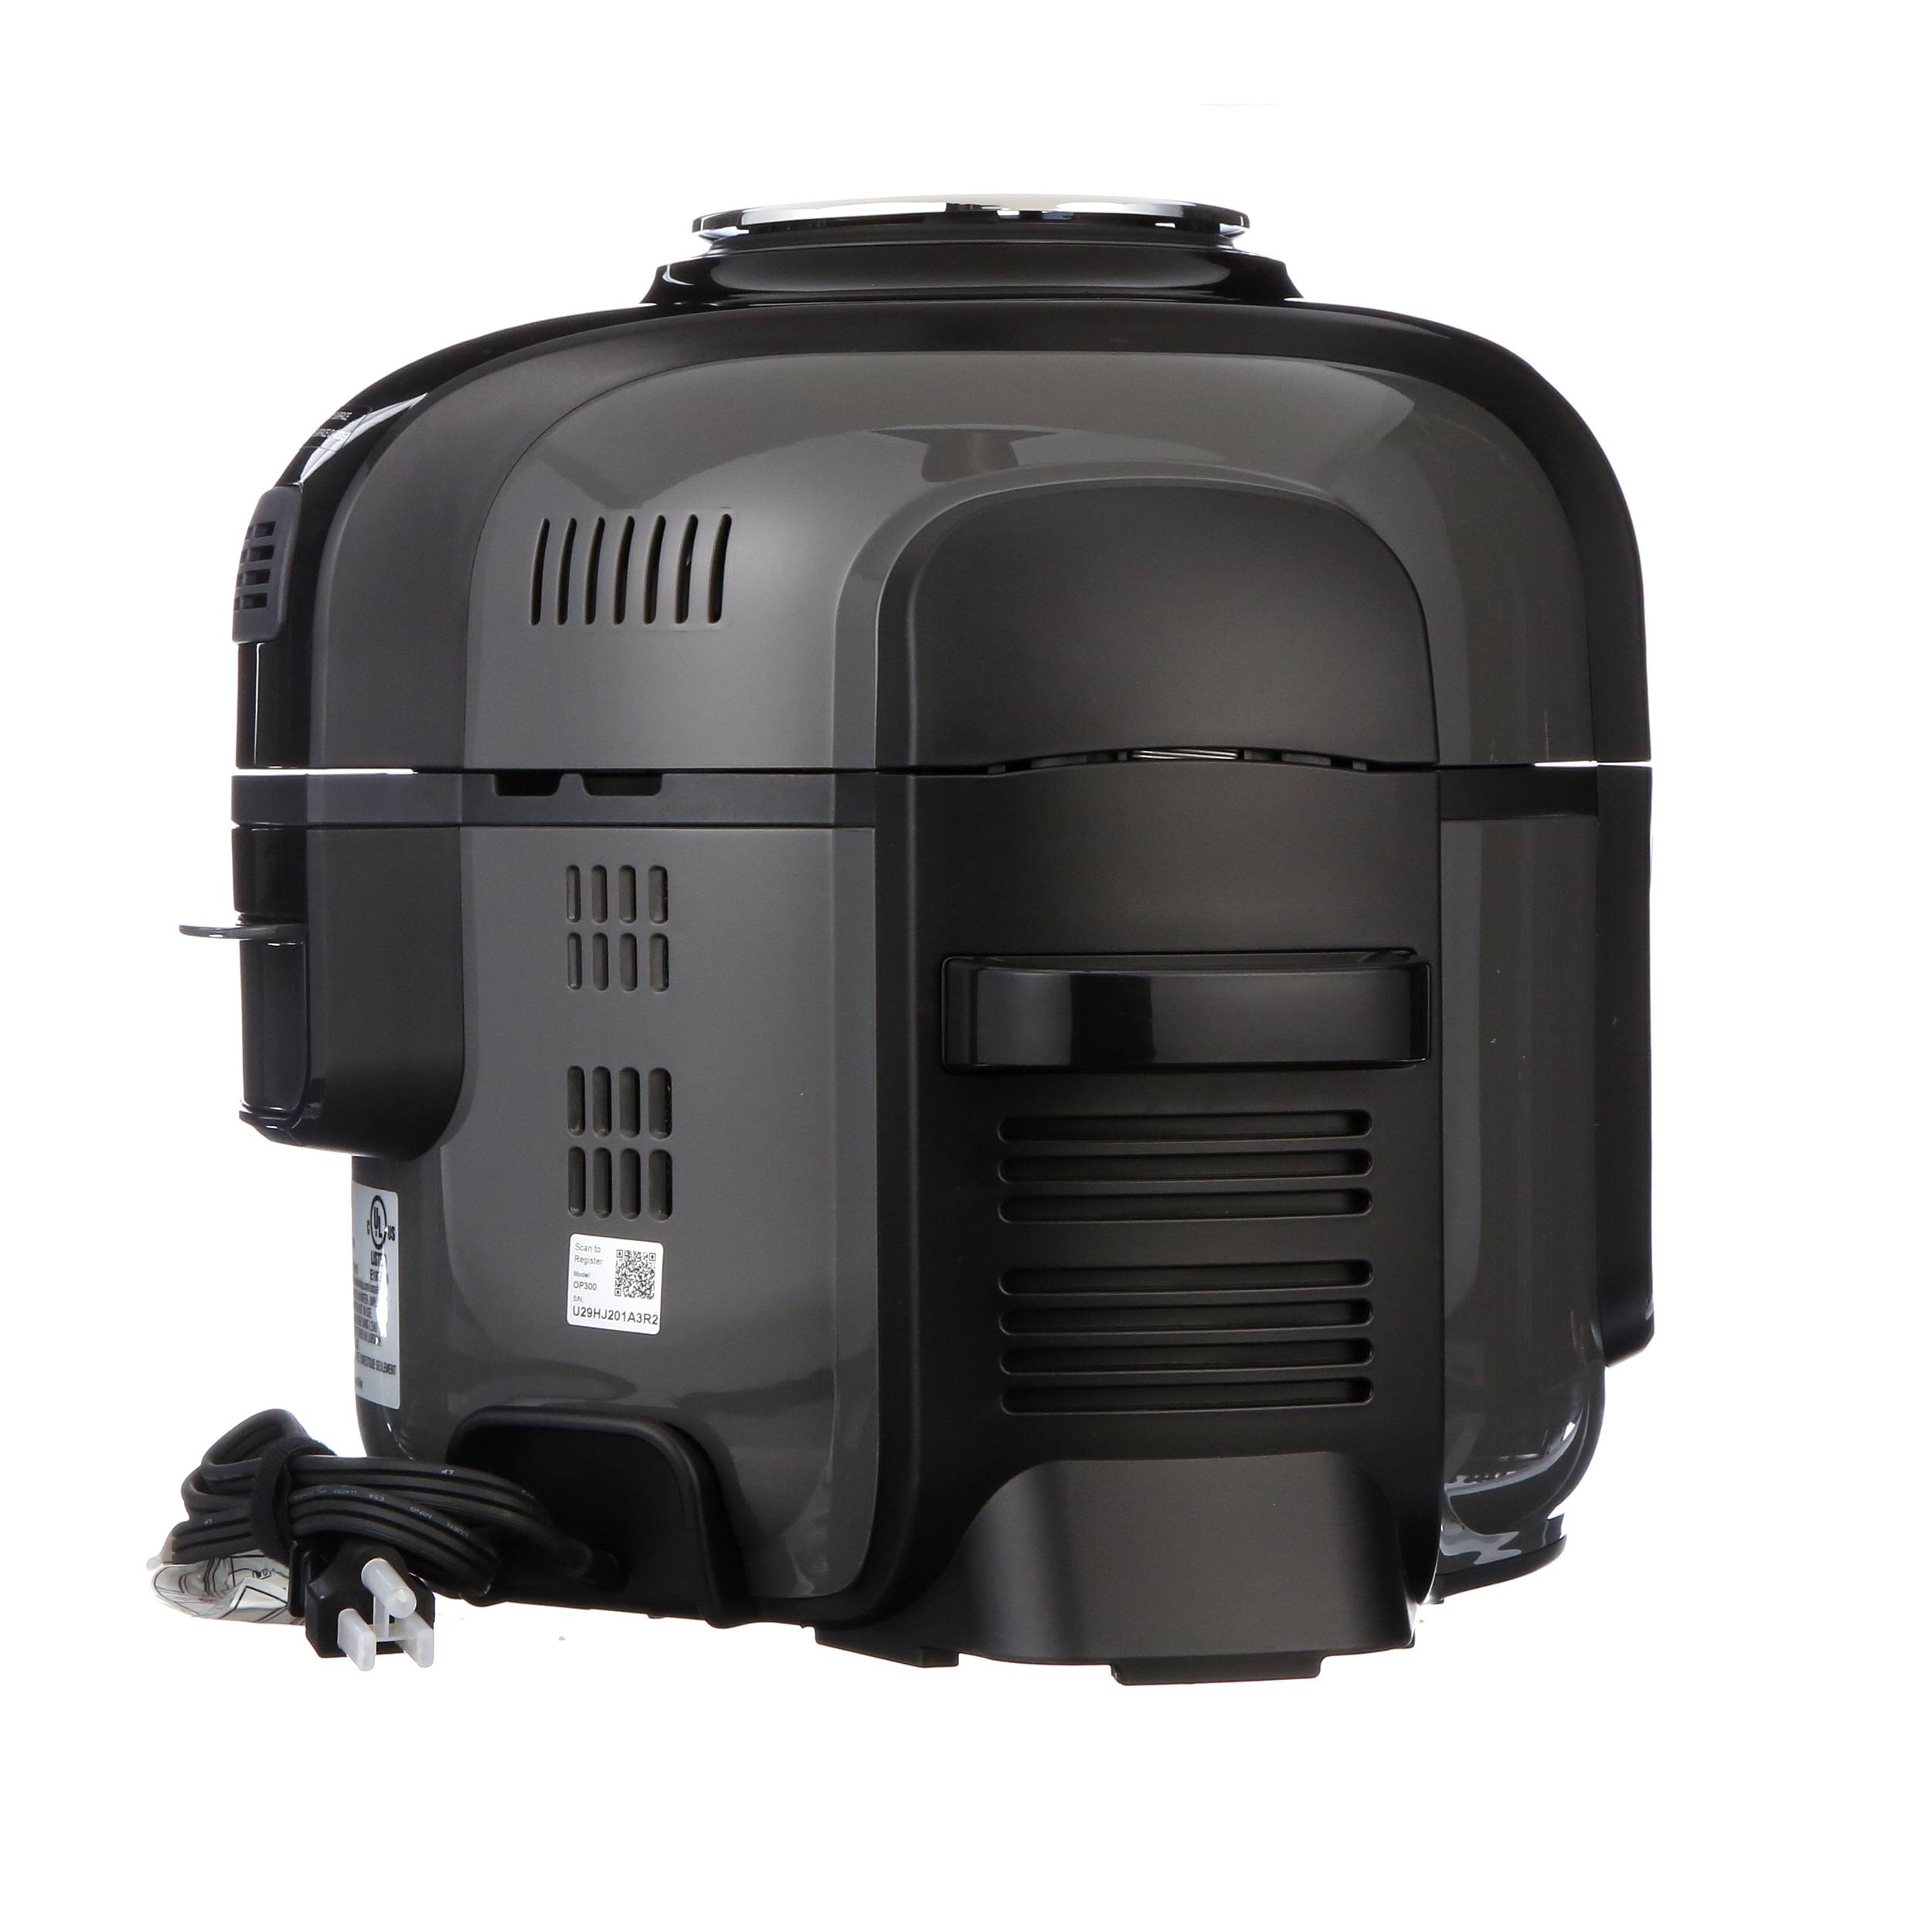 👨‍🍳 [New Launch] Ninja Foodi 11-in-1 6L Multicooker and Air Fryer in one  pot (OP350)